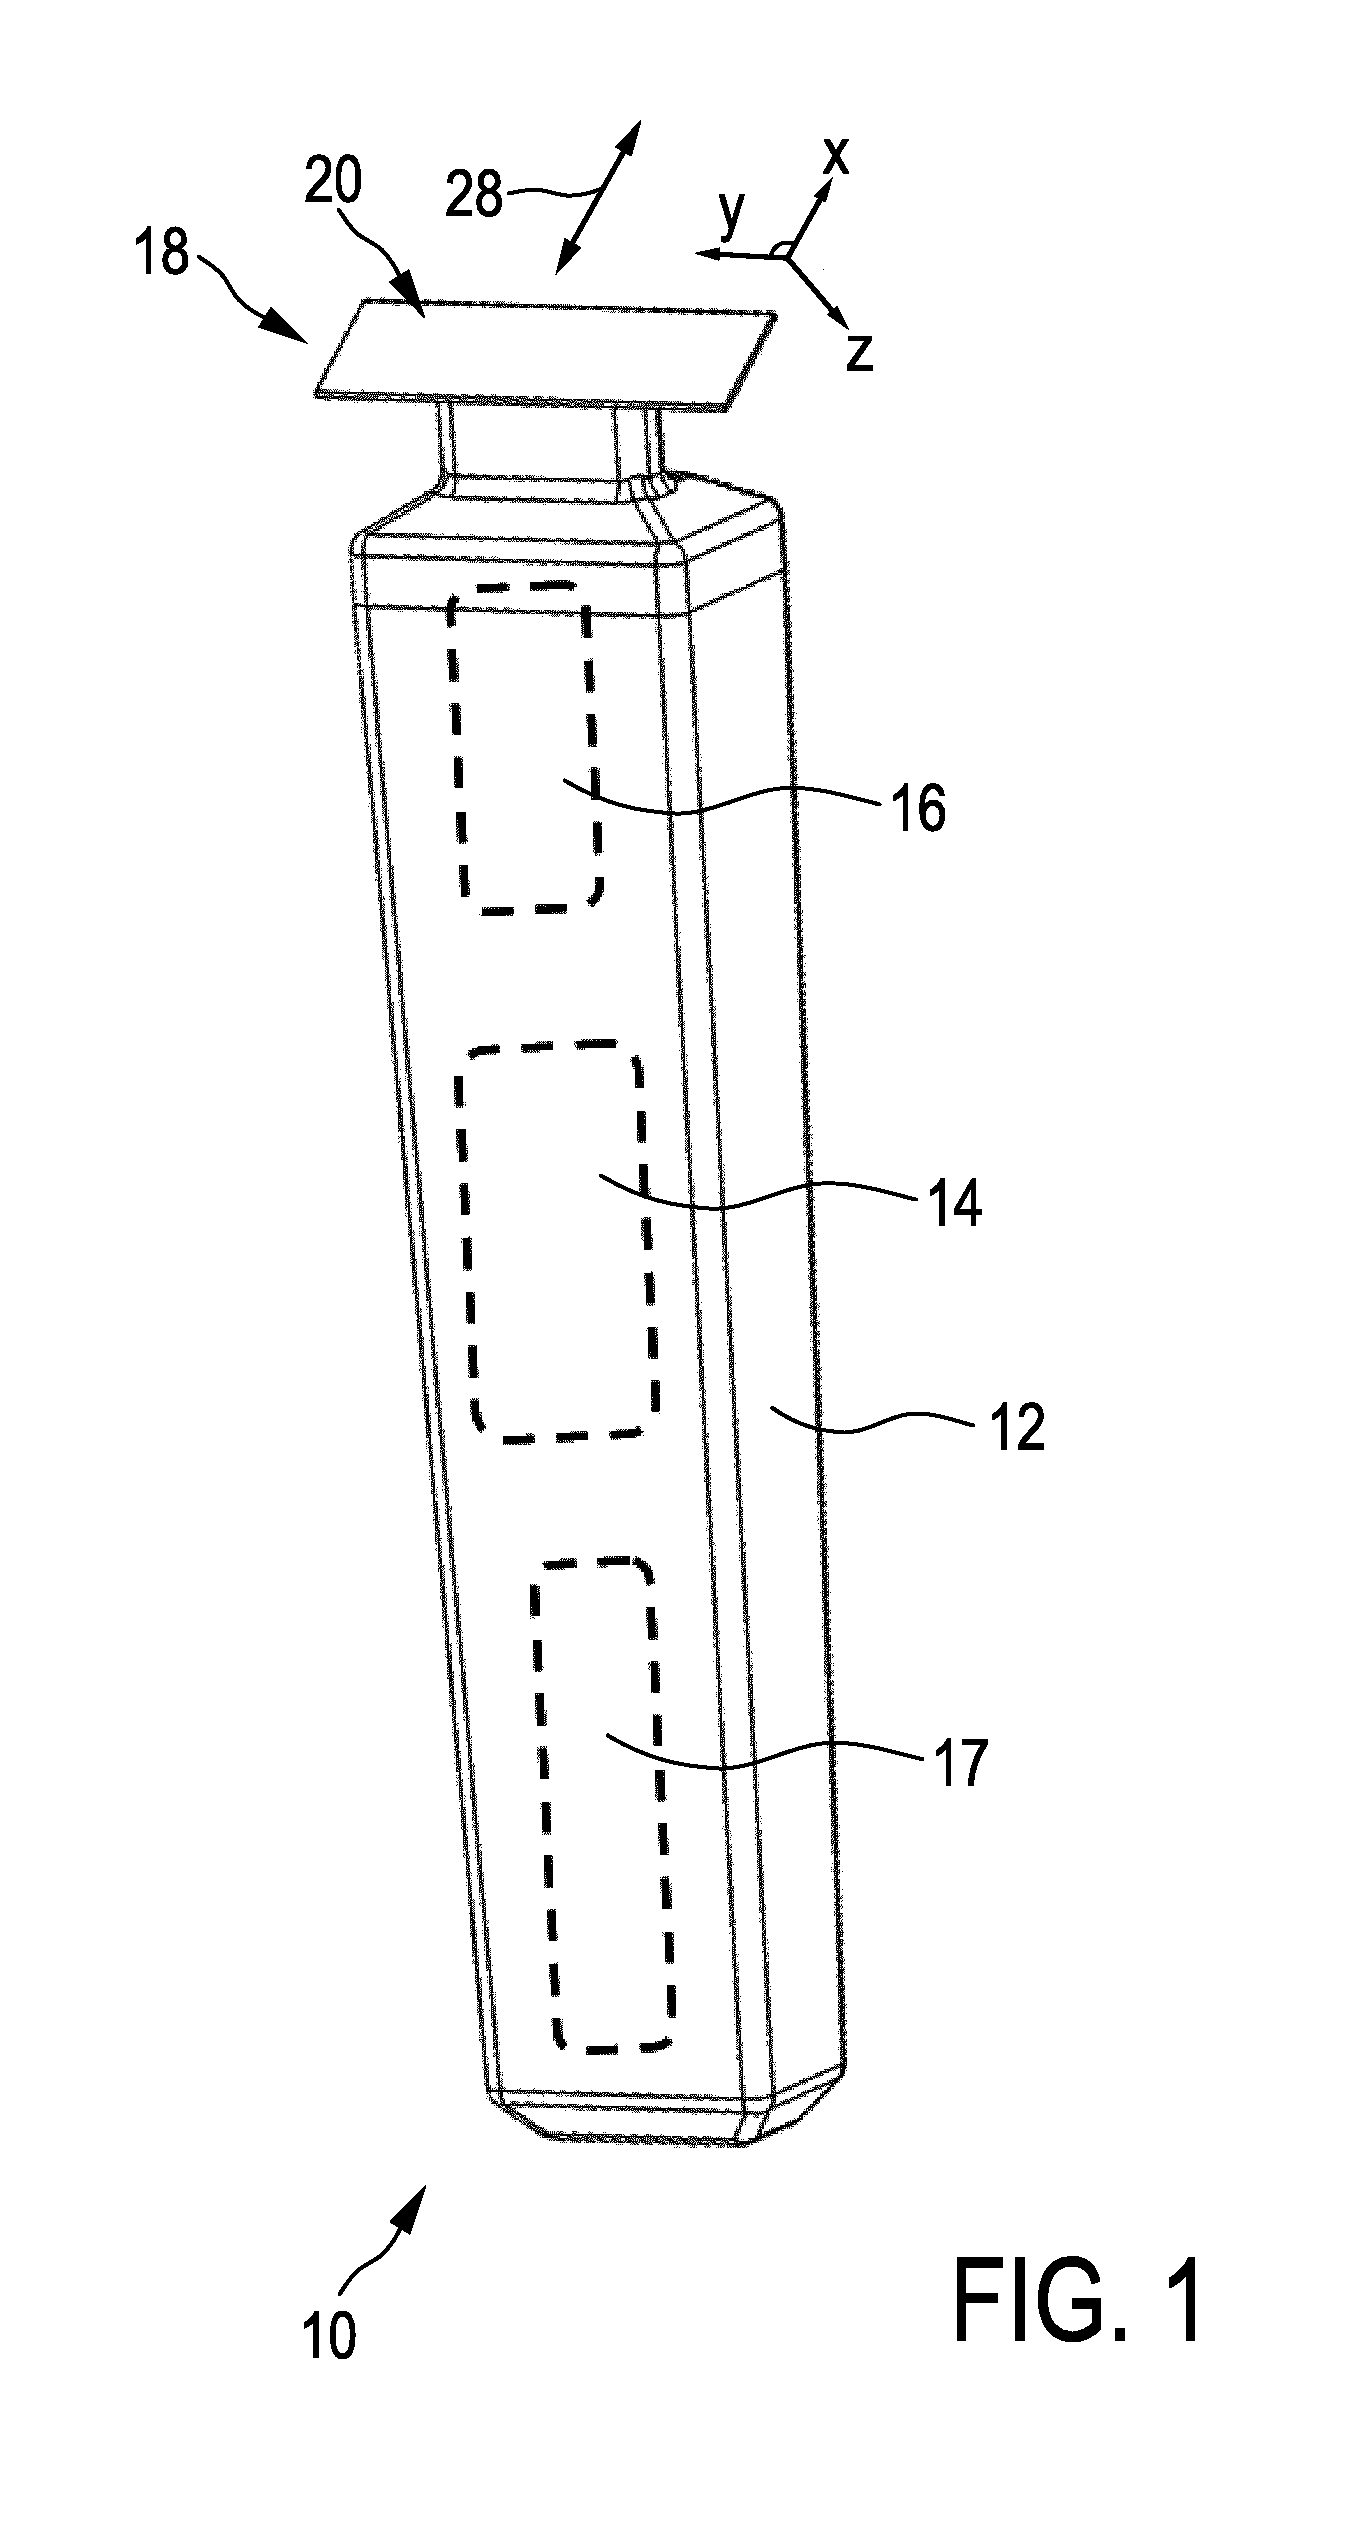 Blade set, hair cutting appliance, and related manufacturing method